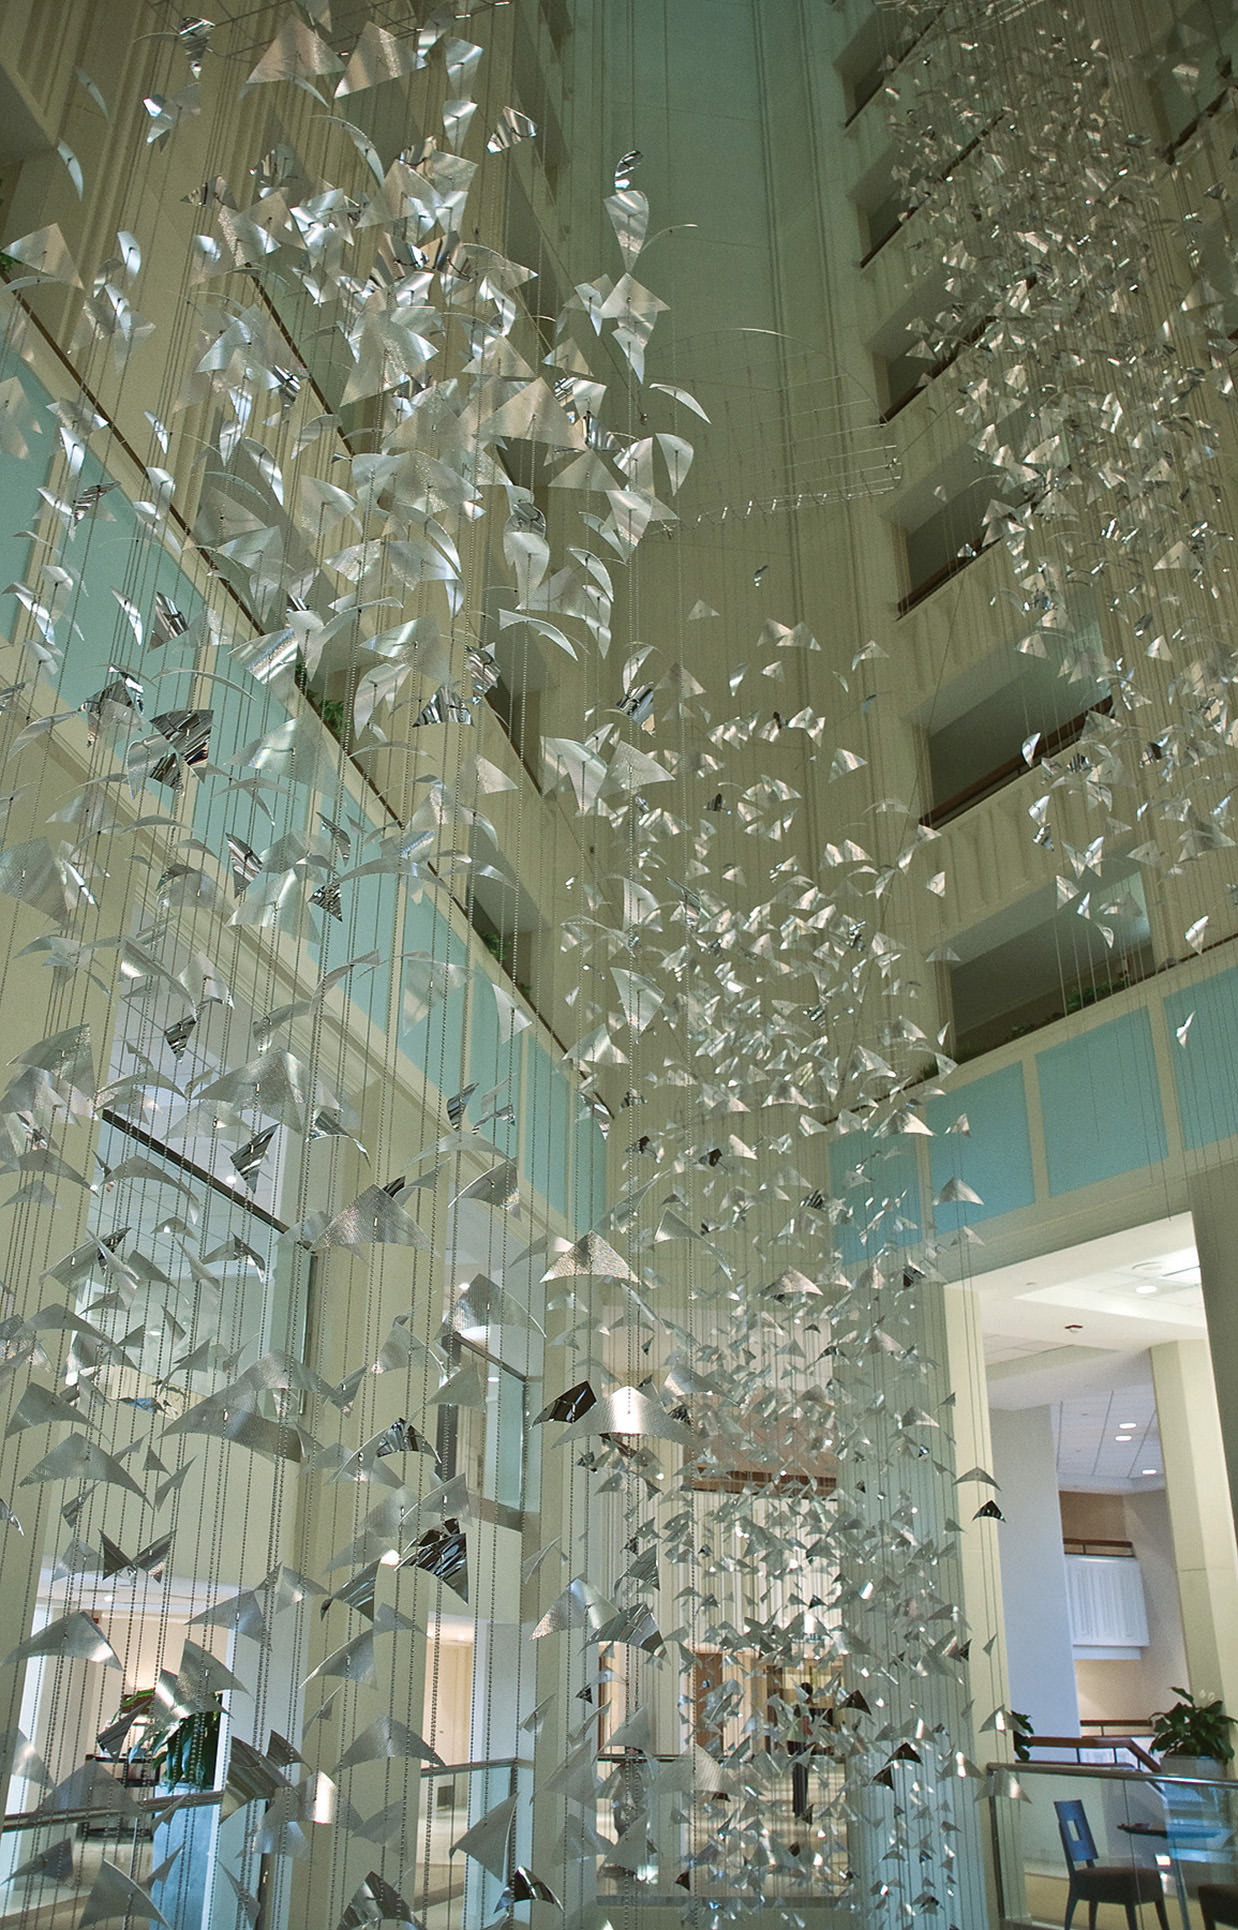 Talley Fisher's Migration hospitality art sculpture in the atrium of Buena Vista Palace Resort